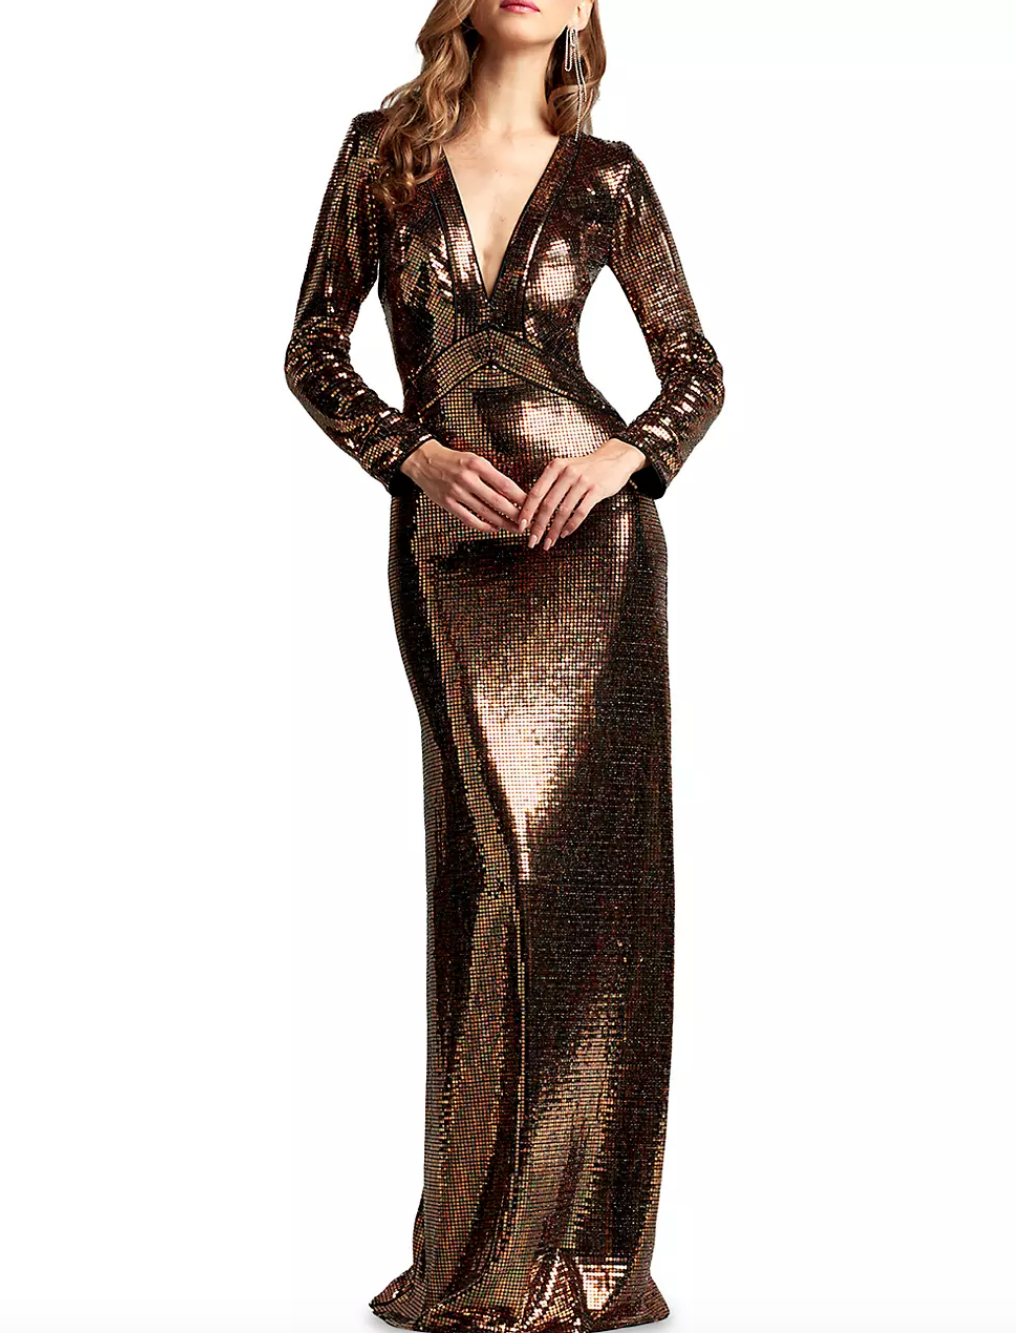 Cynthia Bailey's Gold Sequin Long Sleeve Gown